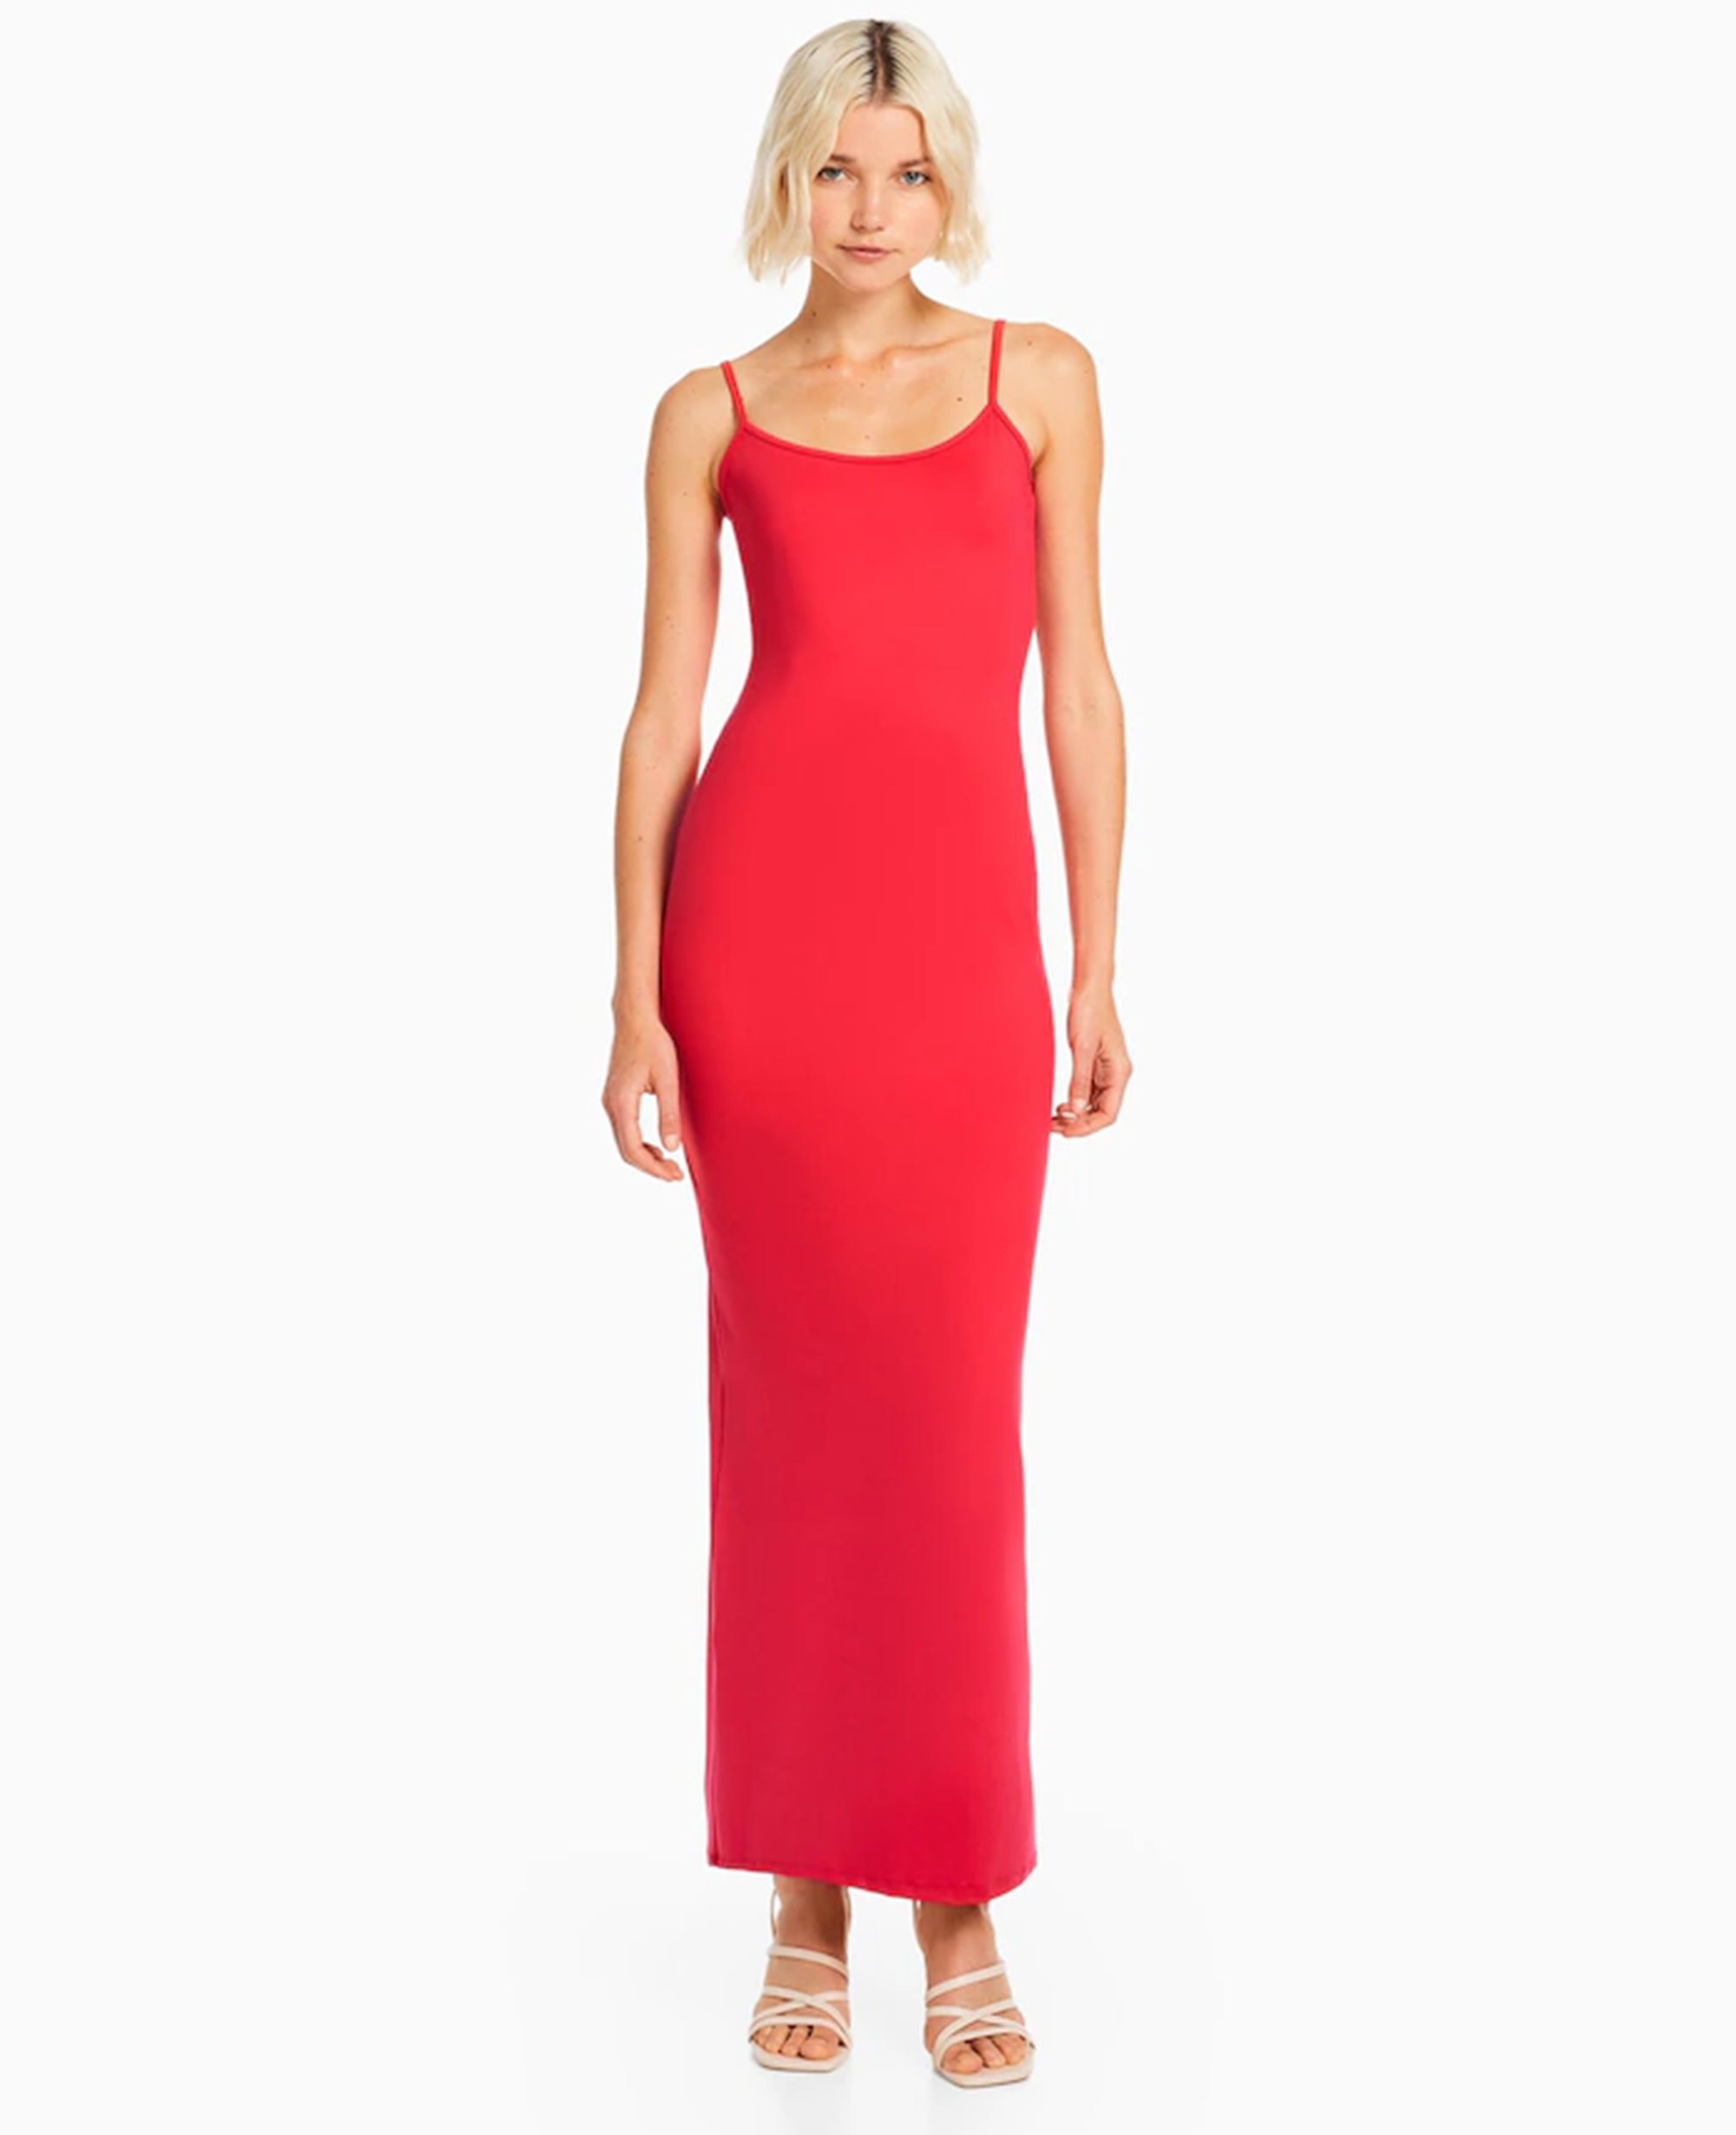 I got an  dupe for Kim Kardashian's viral Skims dress - it looks and  fits the same for half the price